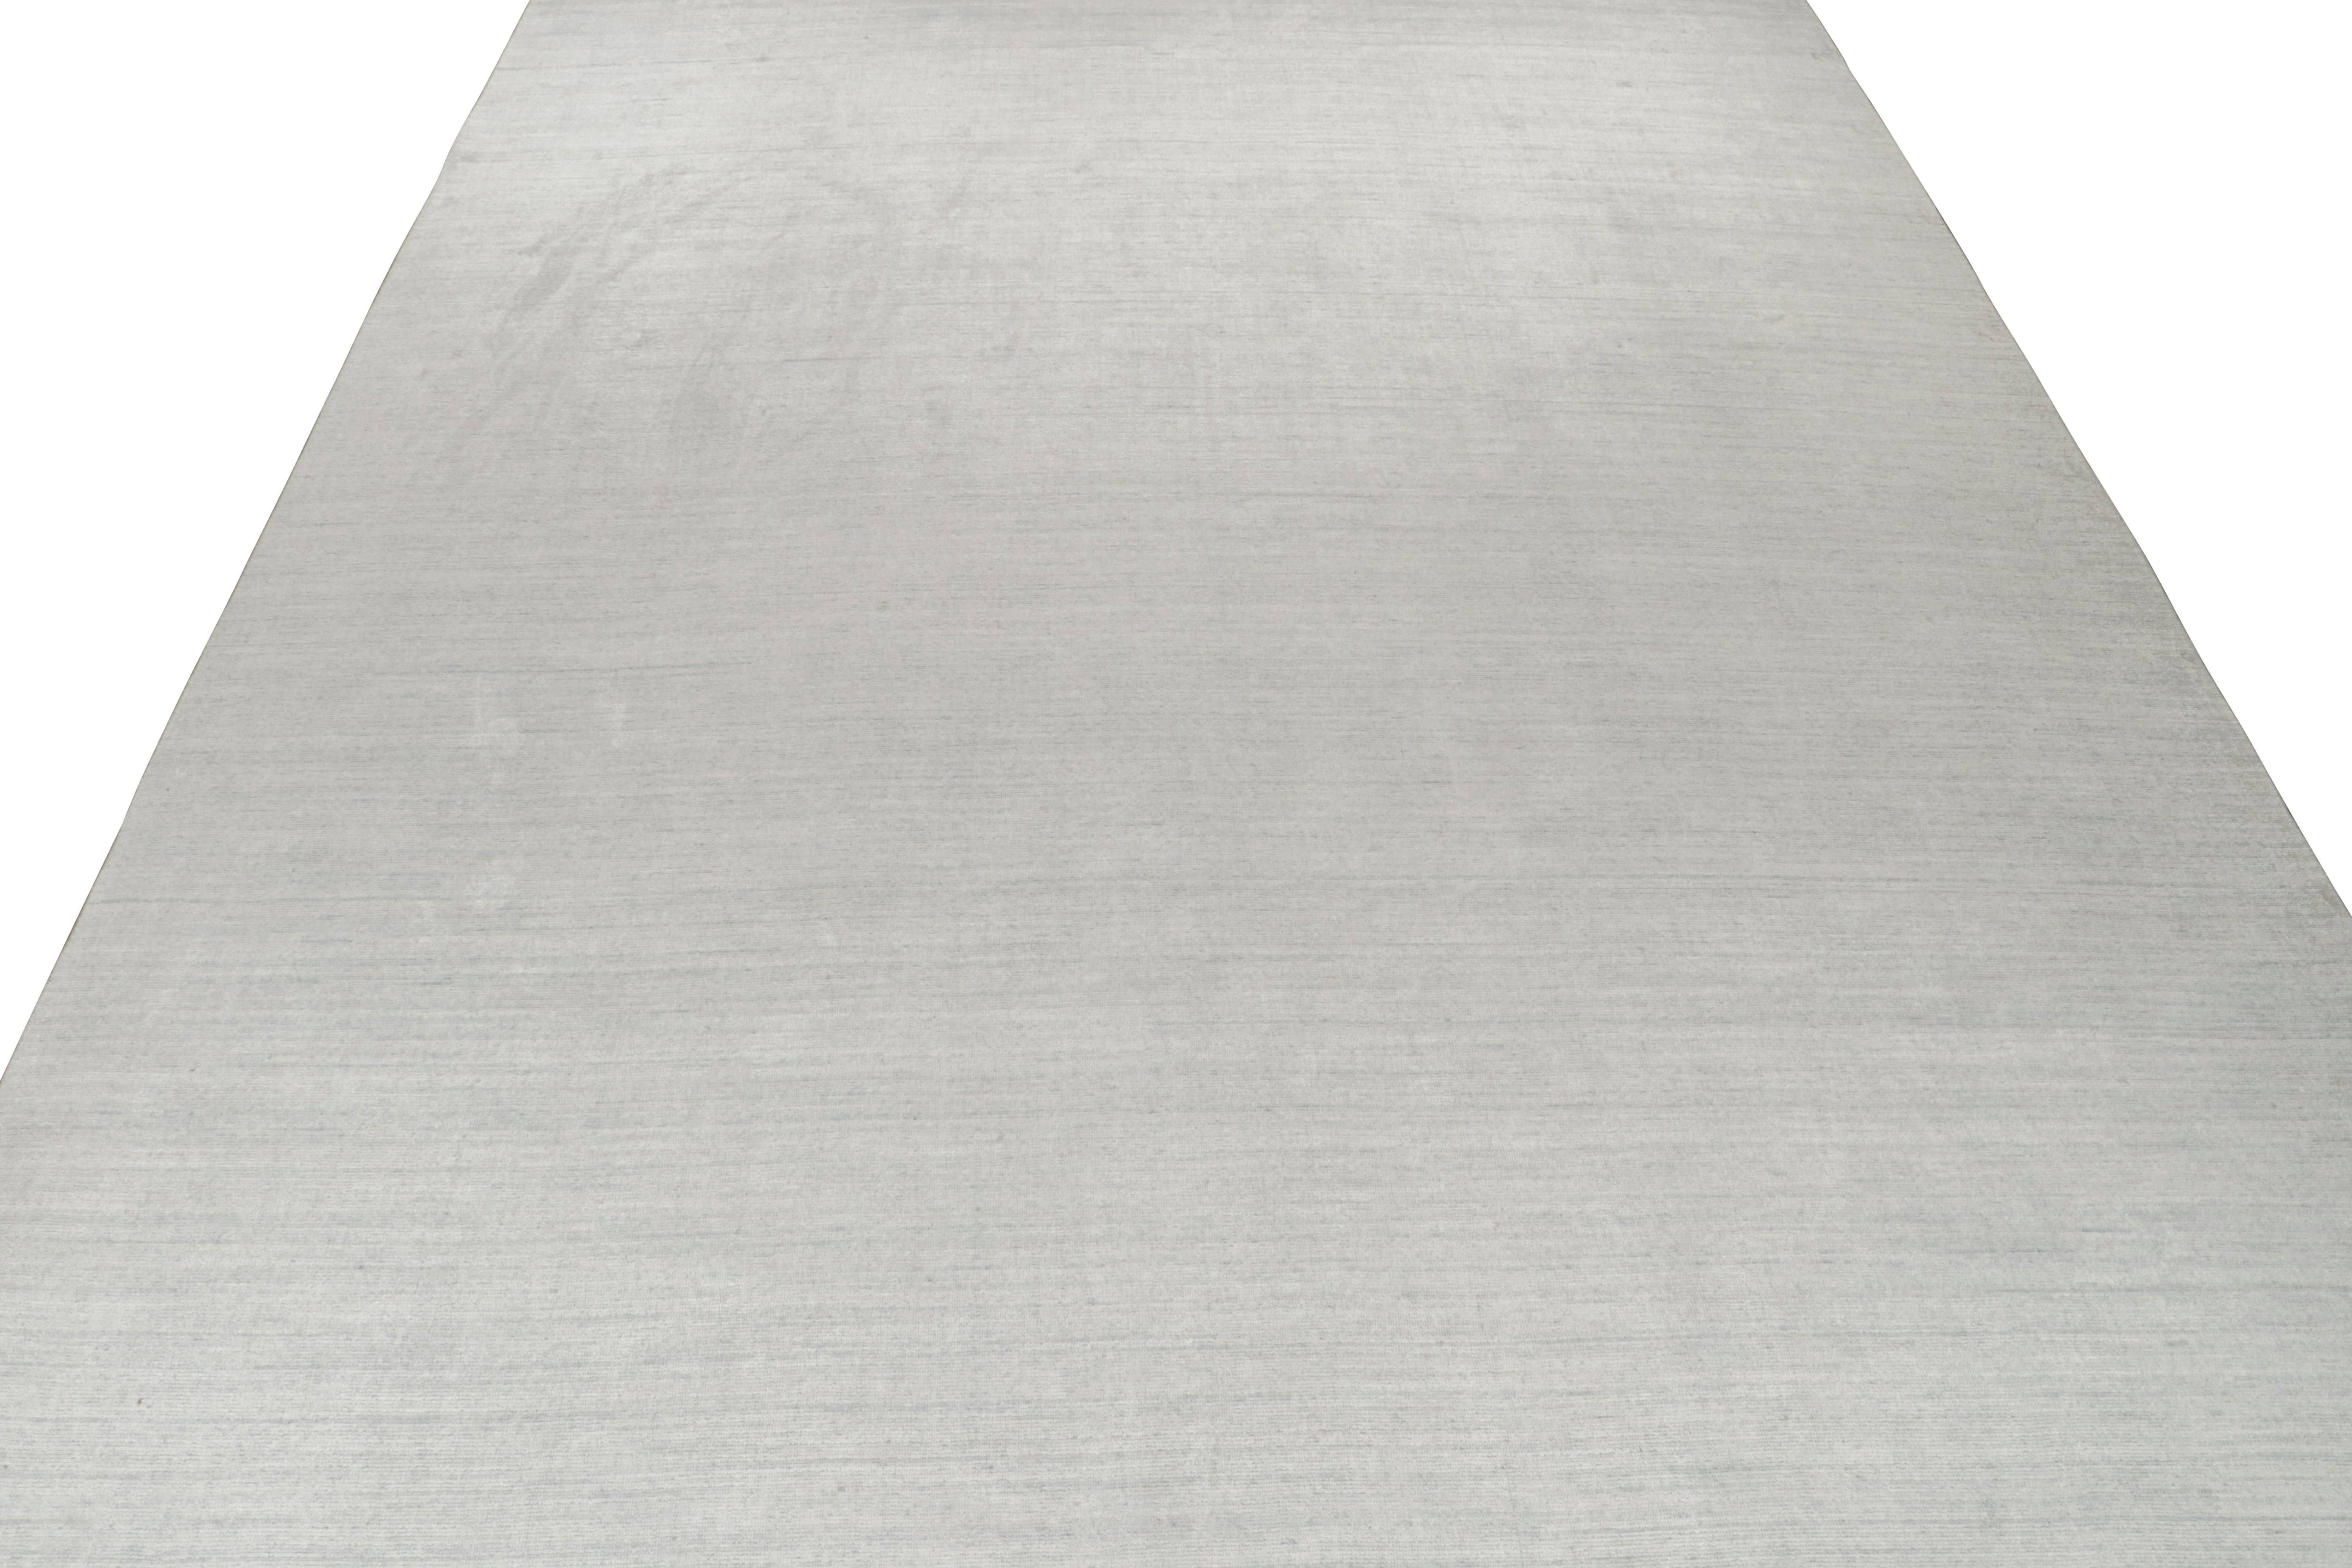 Contemporary Rug & Kilim’s Plain Modern Rug in Solid Silver-Gray Tone-on-Tone For Sale